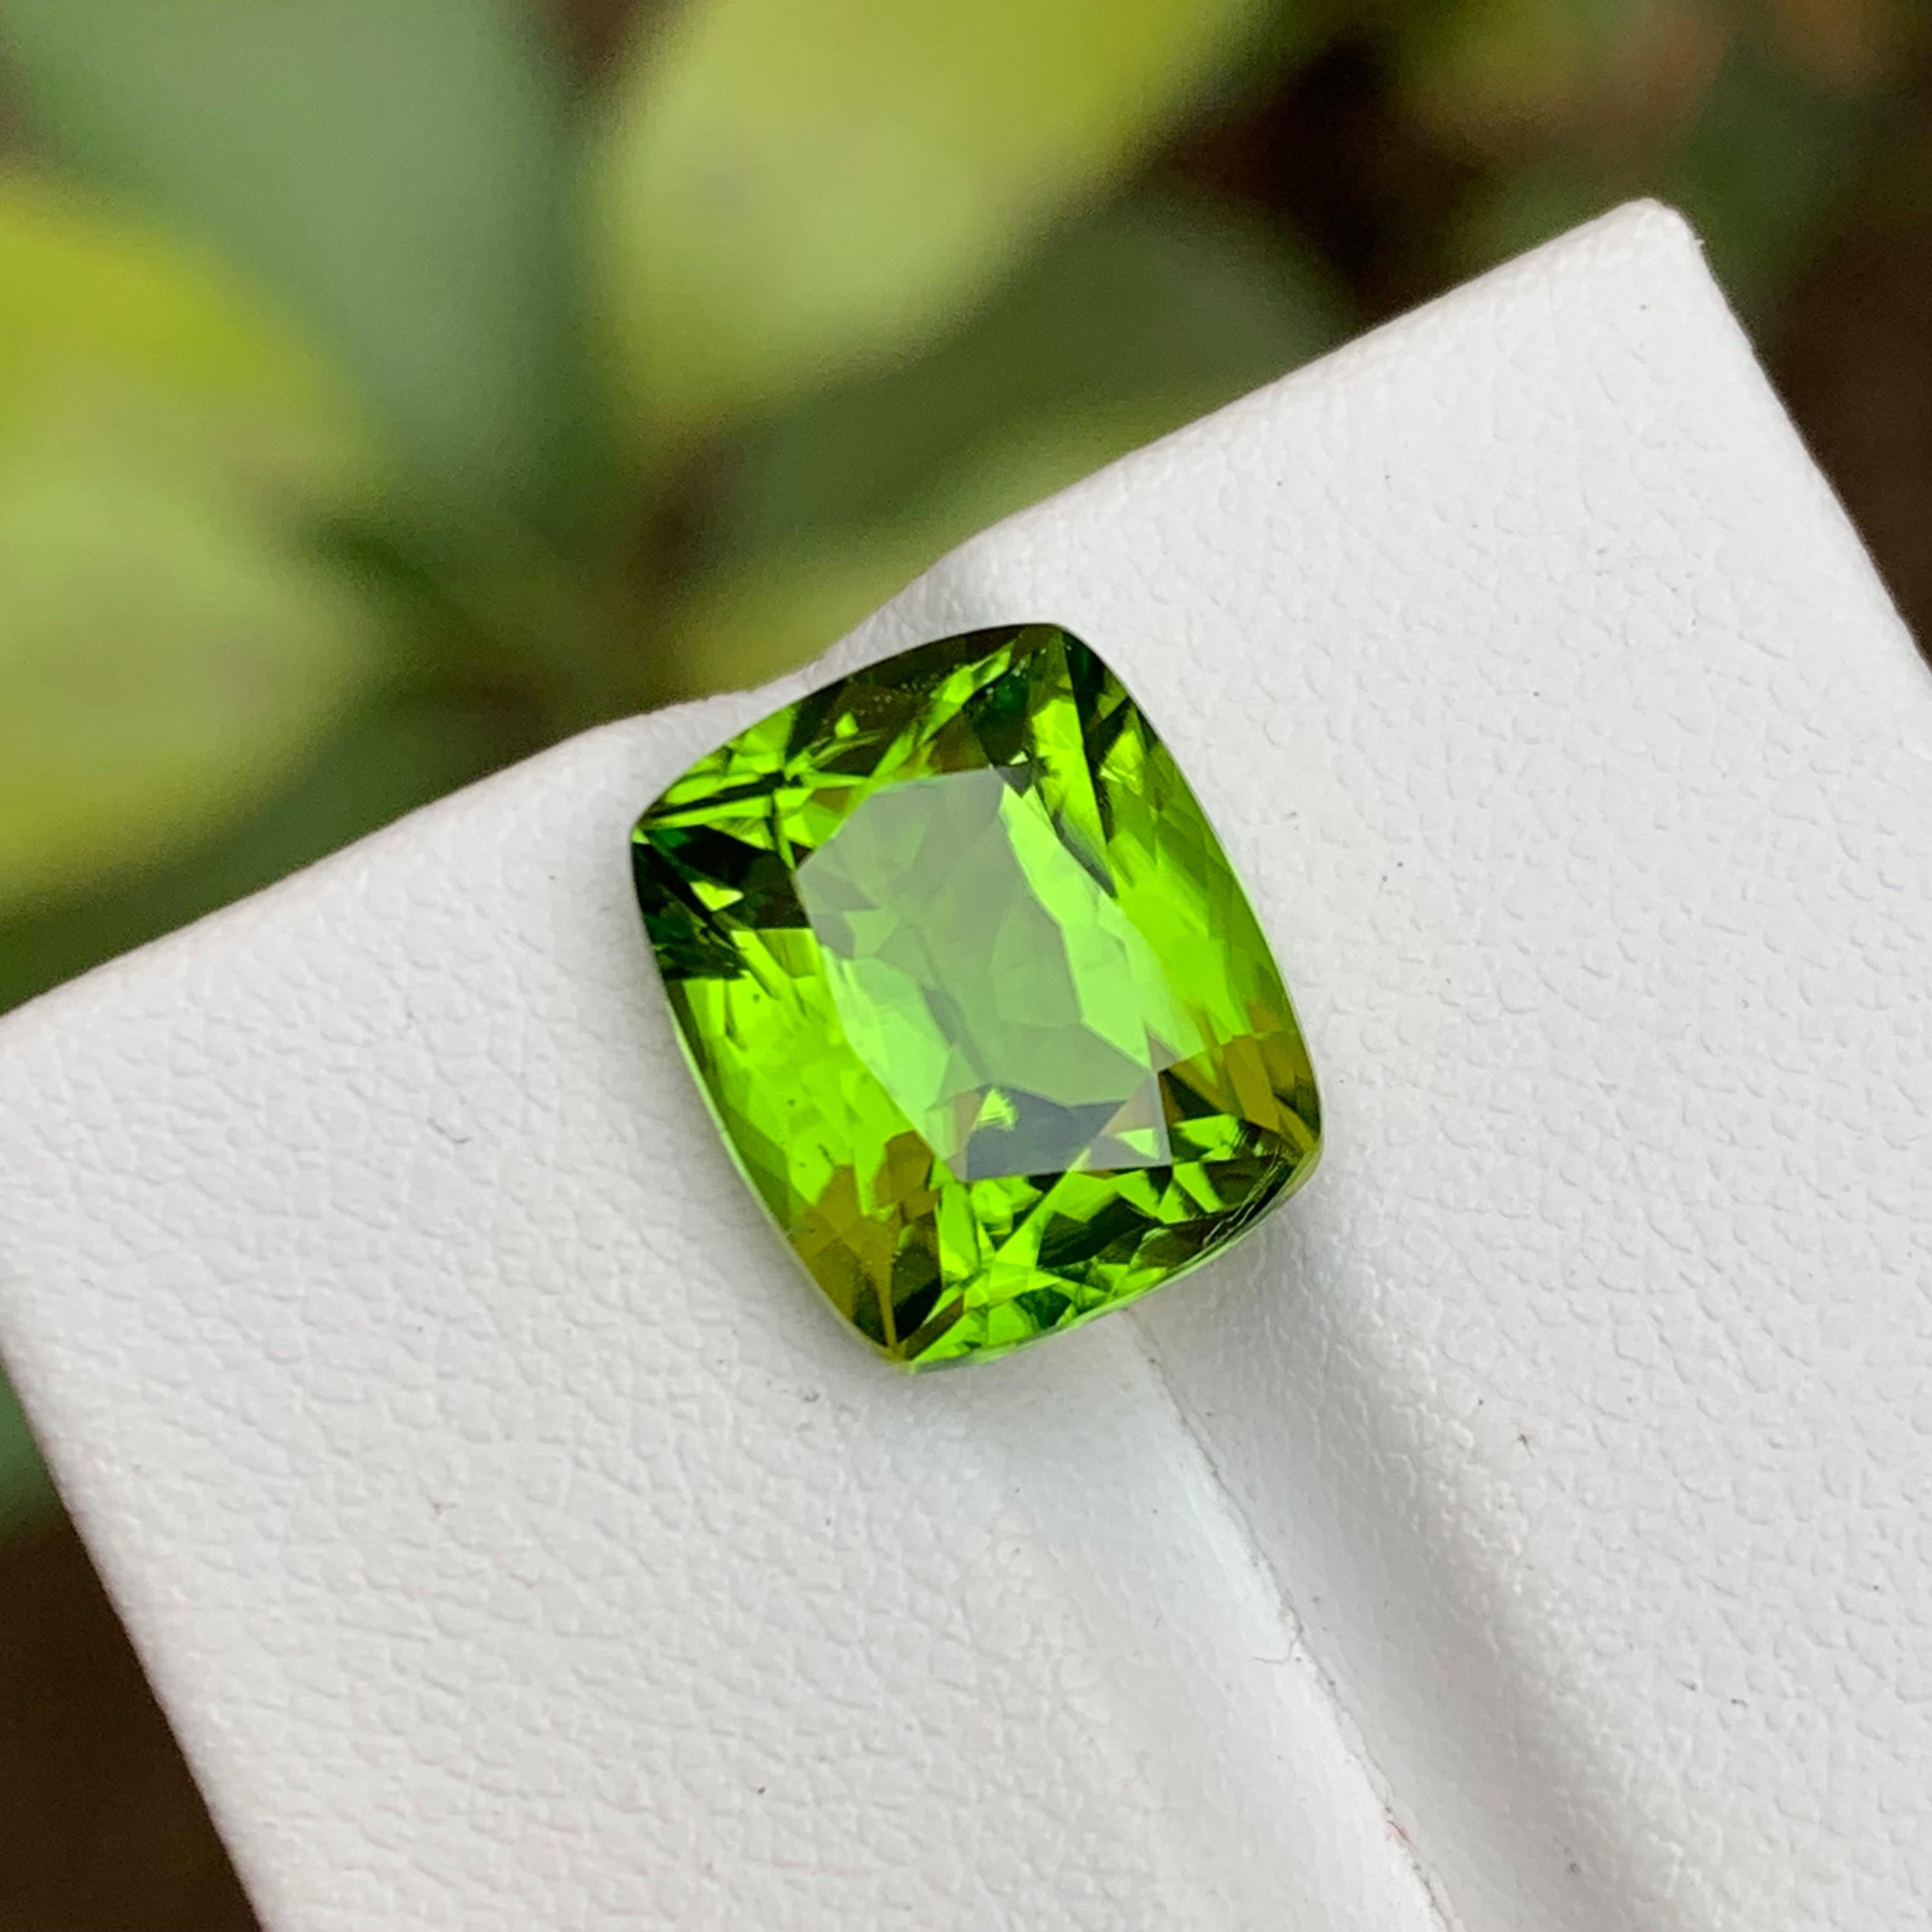 Gemstone Type: Peridot
Weight: 7.00 Carats
Dimensions: 12.04 x 10.00 x 6.98
Color: Green
Clarity: 99% Eye Clean
Treatment: Untreated
Origin: Pakistan
Certificate: On demand 

Discover the elegance of our Fancy Cushion Cut Rare Natural Green Peridot,